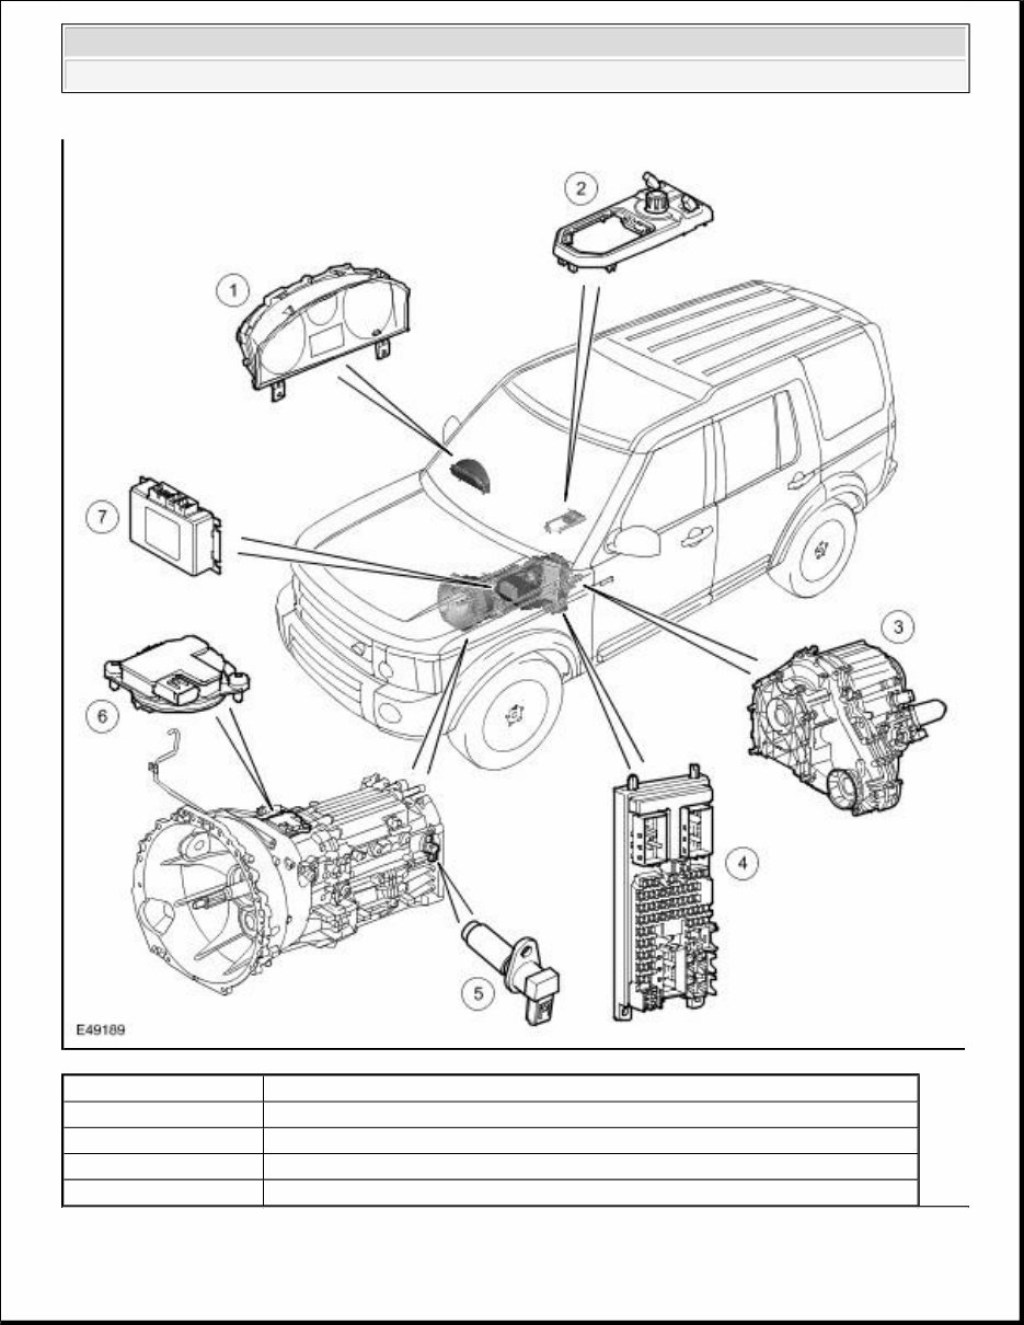 Picture of: Land Rover LR All Models Service and Repair Manual